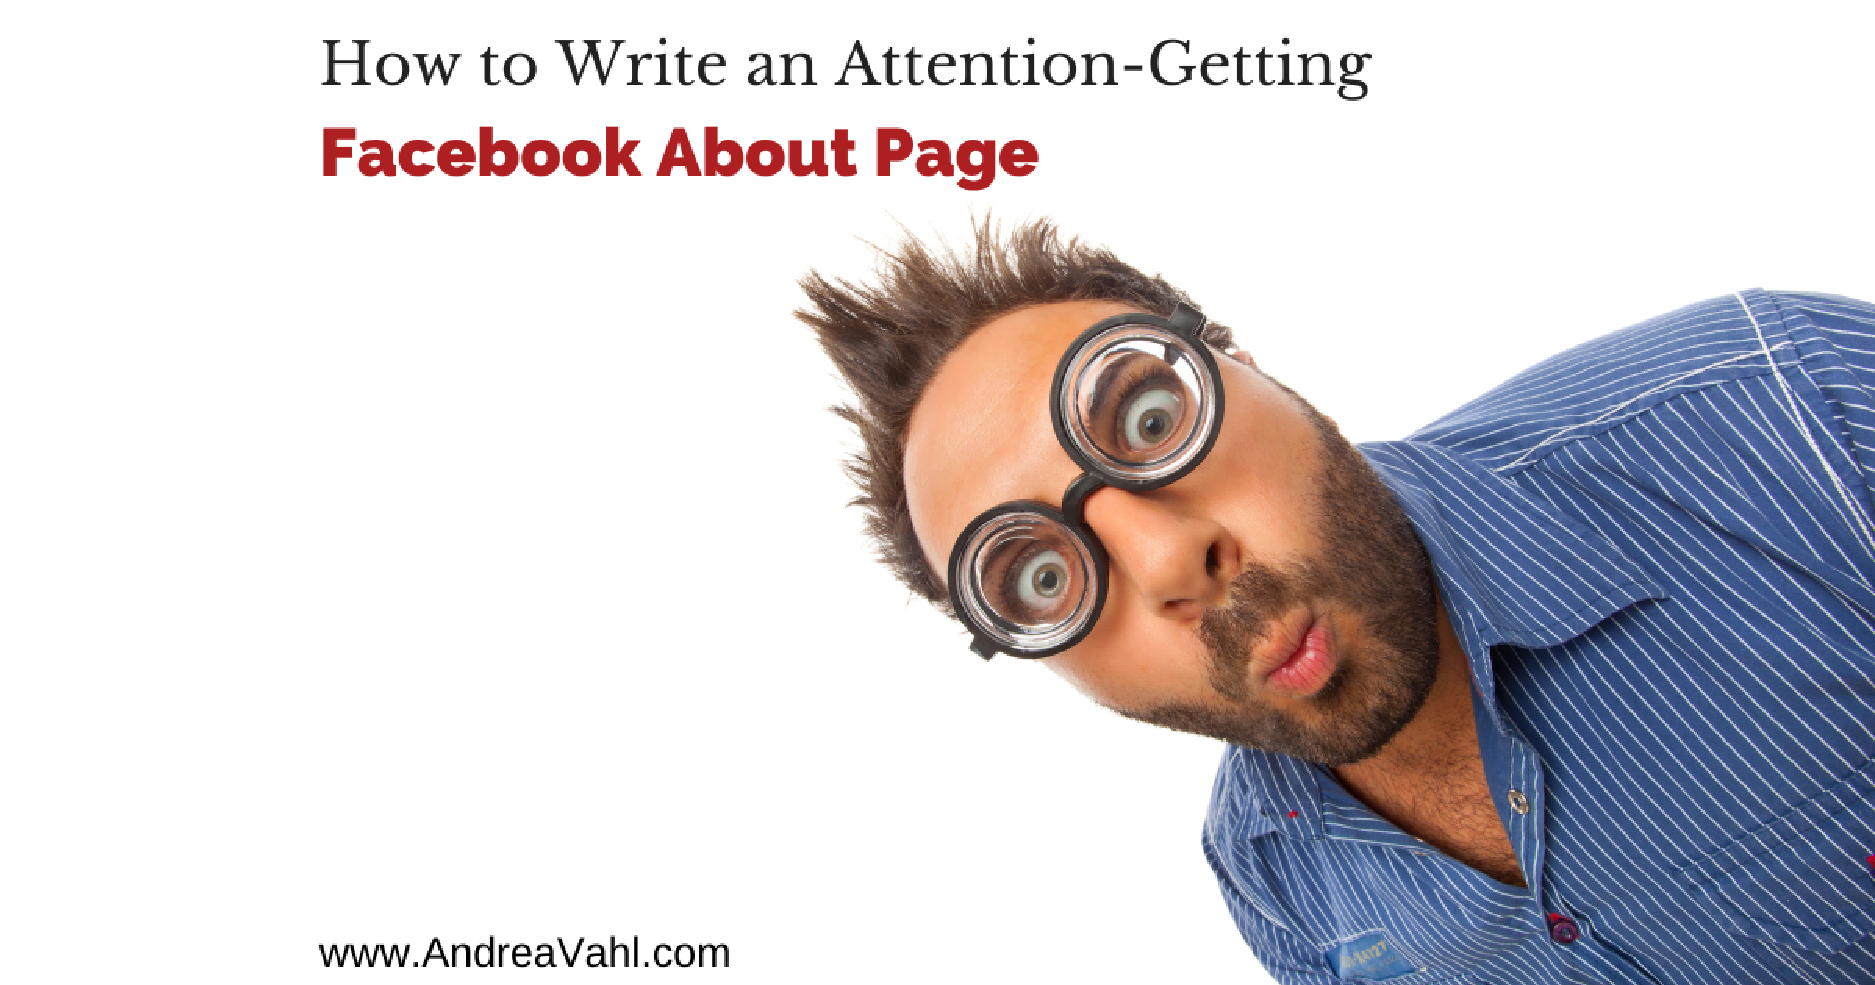 How to Write an Attention-Getting Facebook About Page